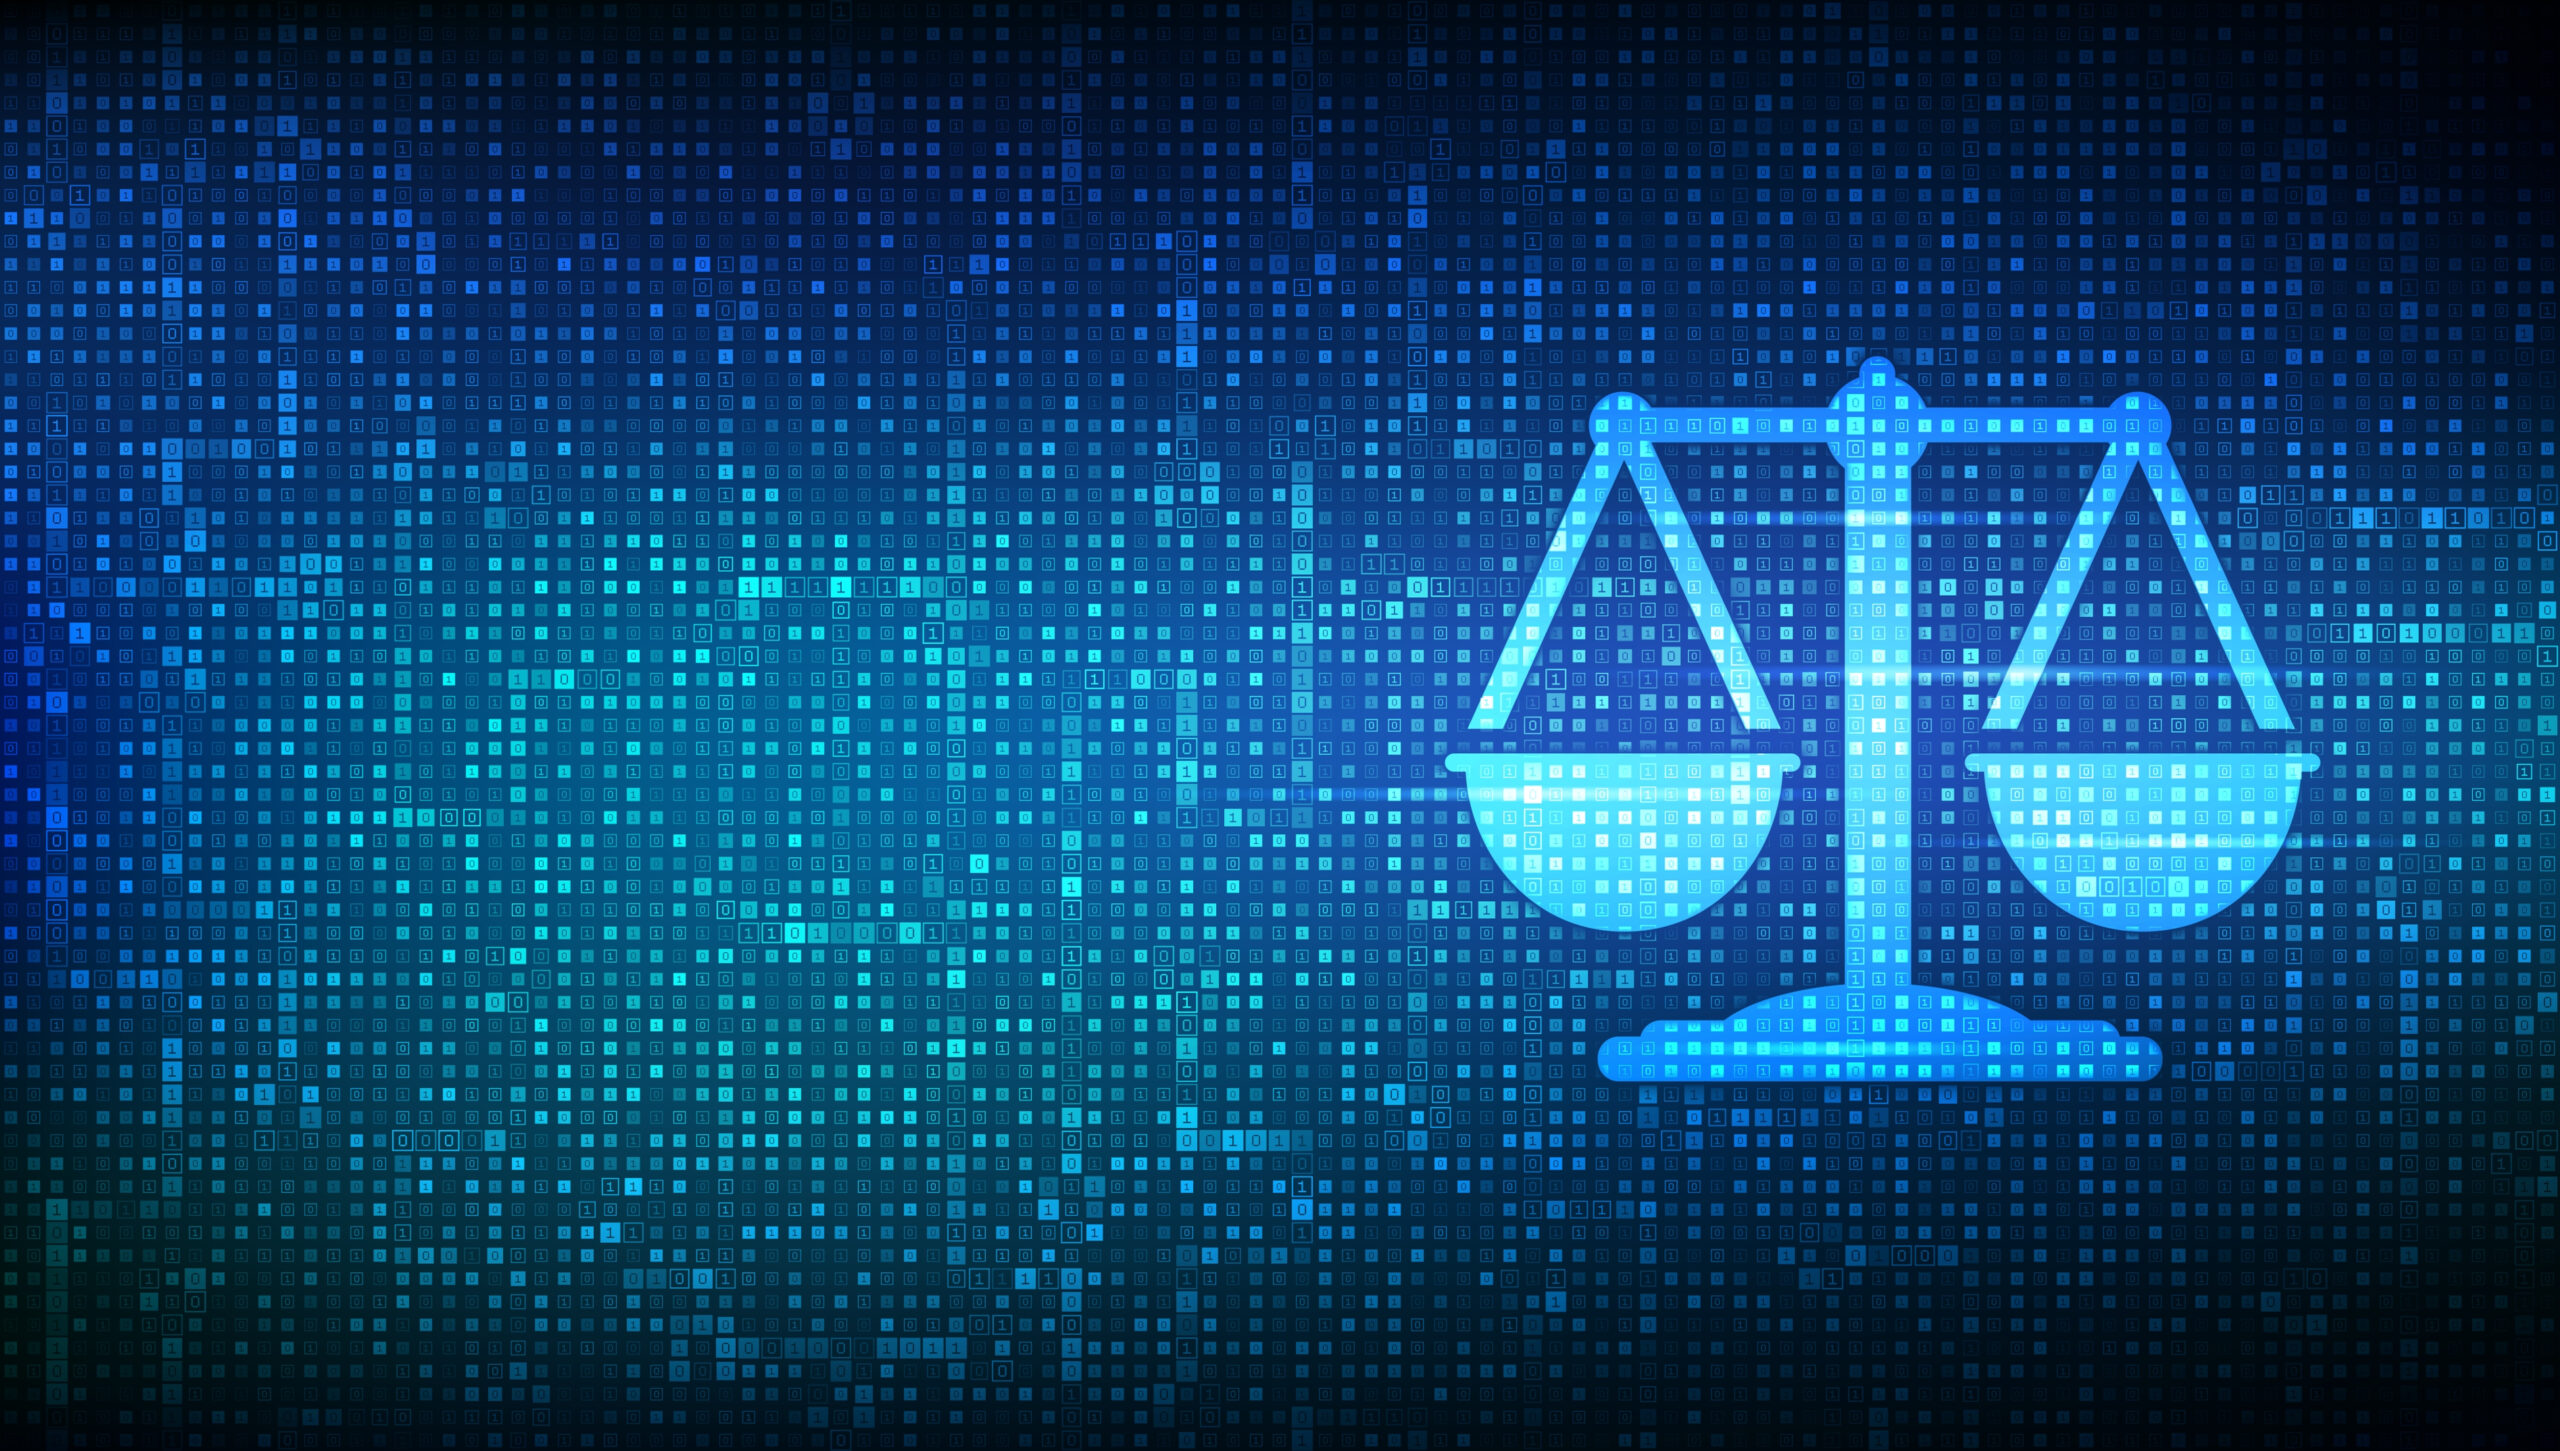 Geek insider, geekinsider, geekinsider. Com,, the role of technological advances in the legal process, explainers